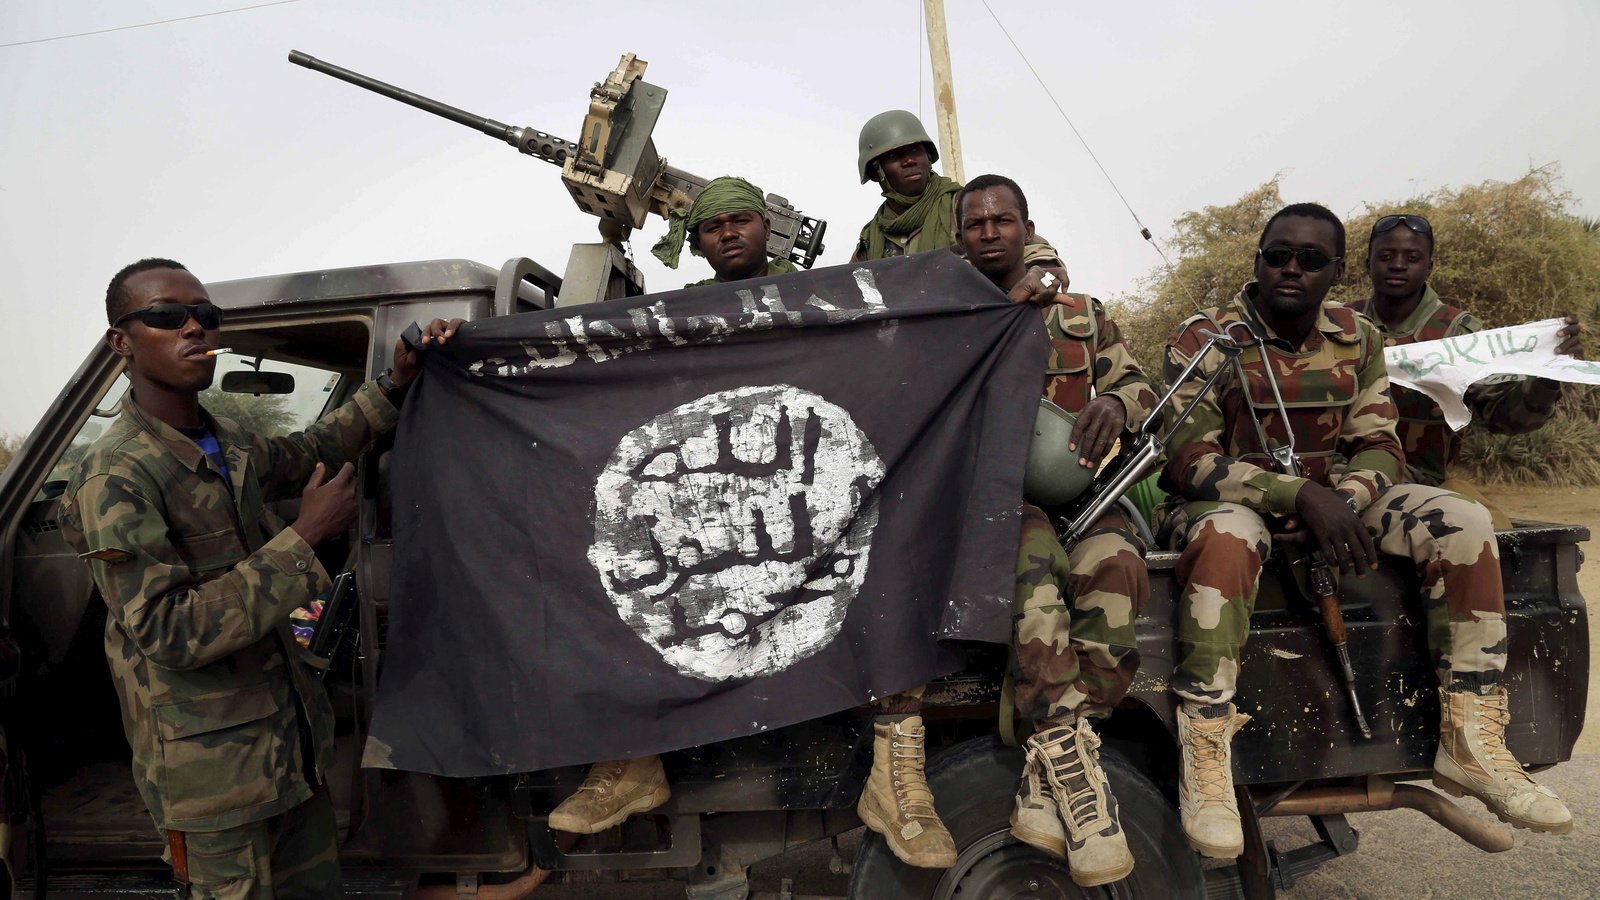 Open door: ISIS enters Niger from border to attack tribes